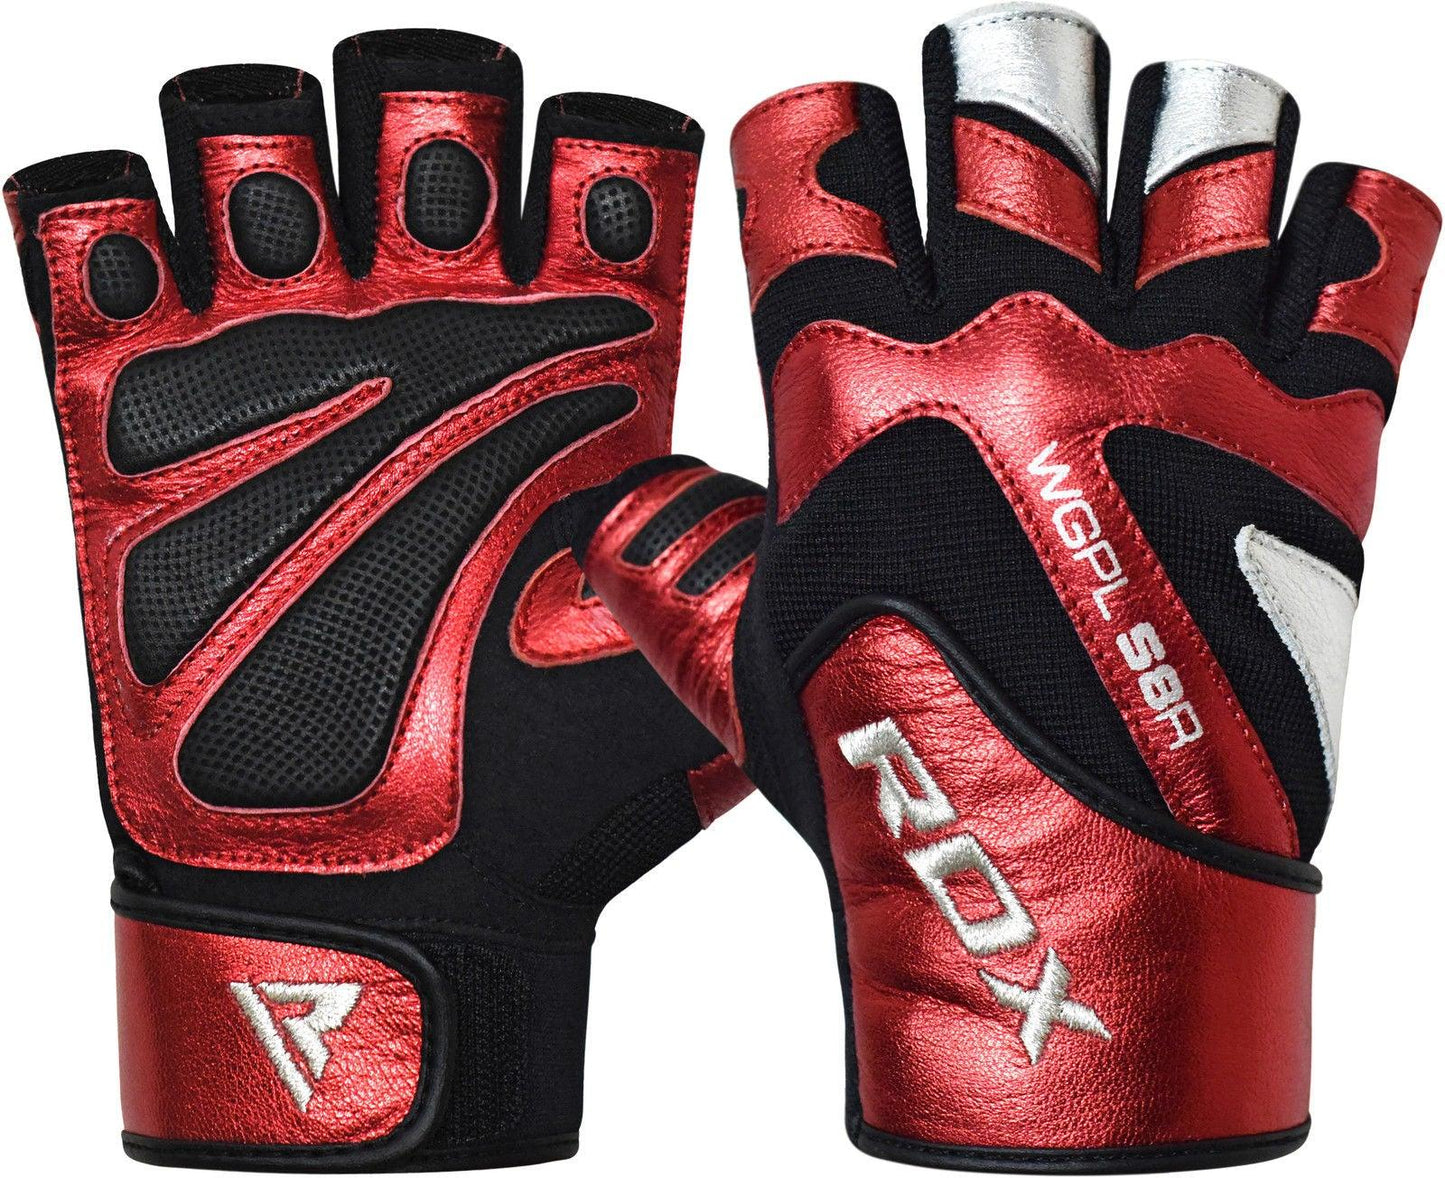 RDX S8 Bold Leather Gym Gloves - Fitness Health 